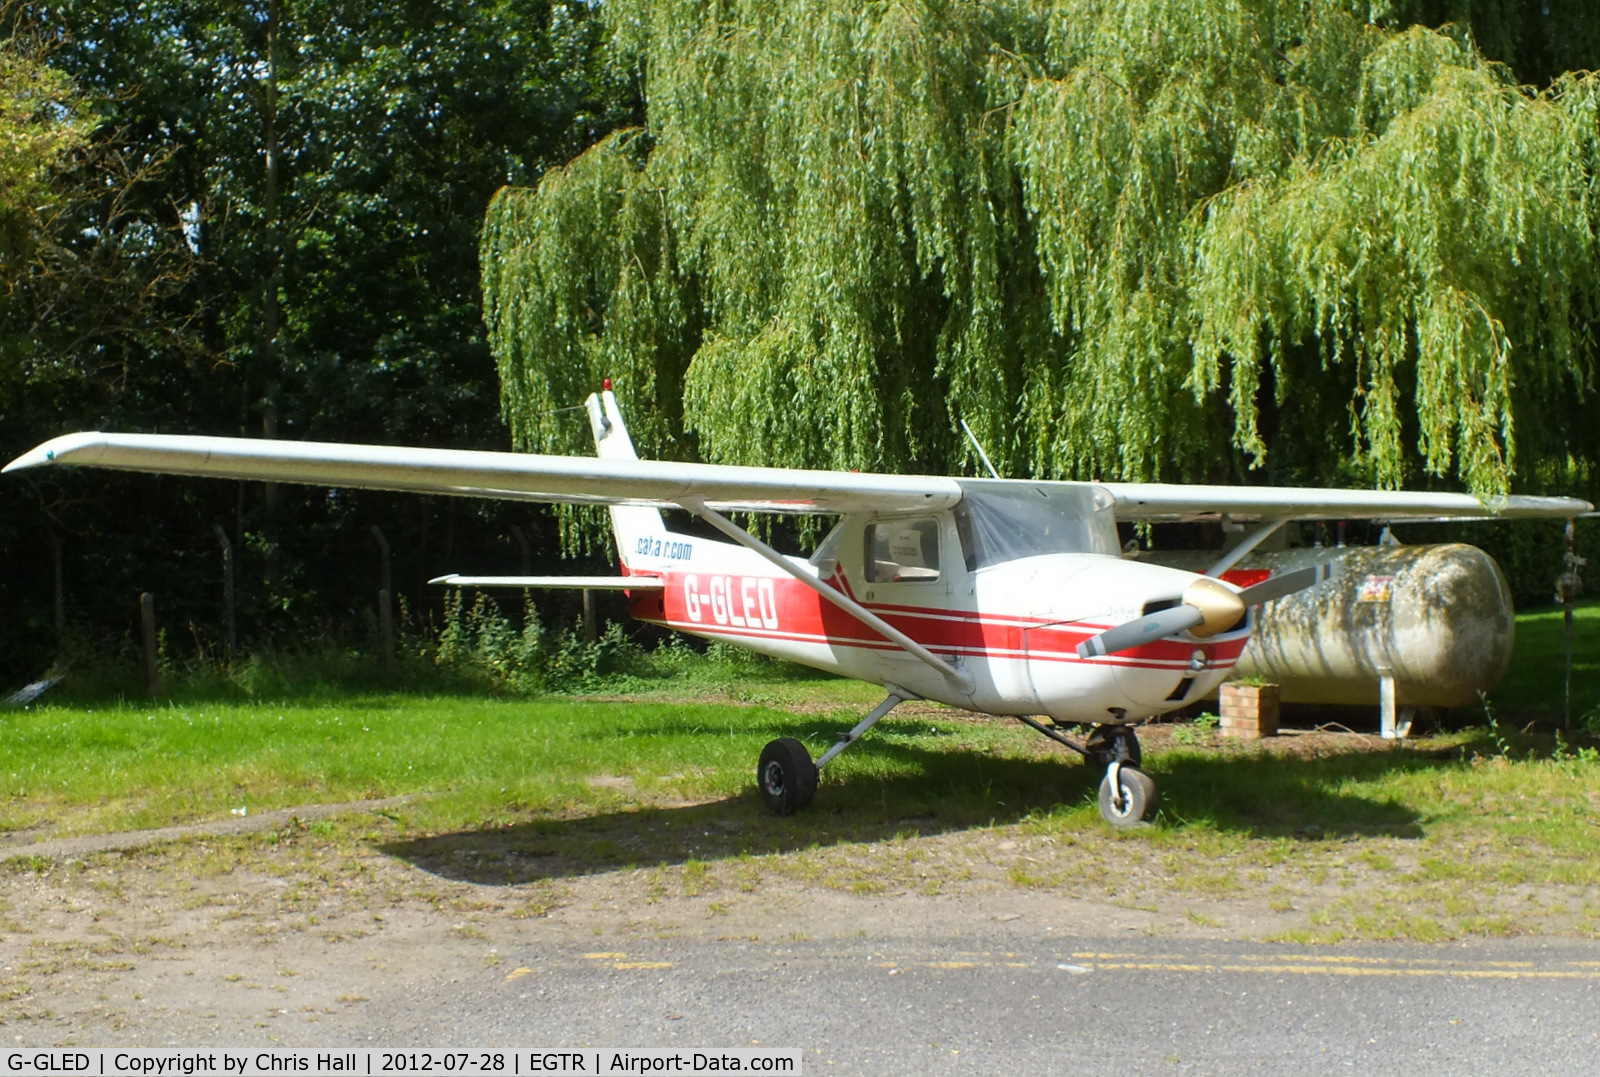 G-GLED, 1975 Cessna 150M C/N 150-76673, parked at the airfield entrance with a For Sale sign in the window